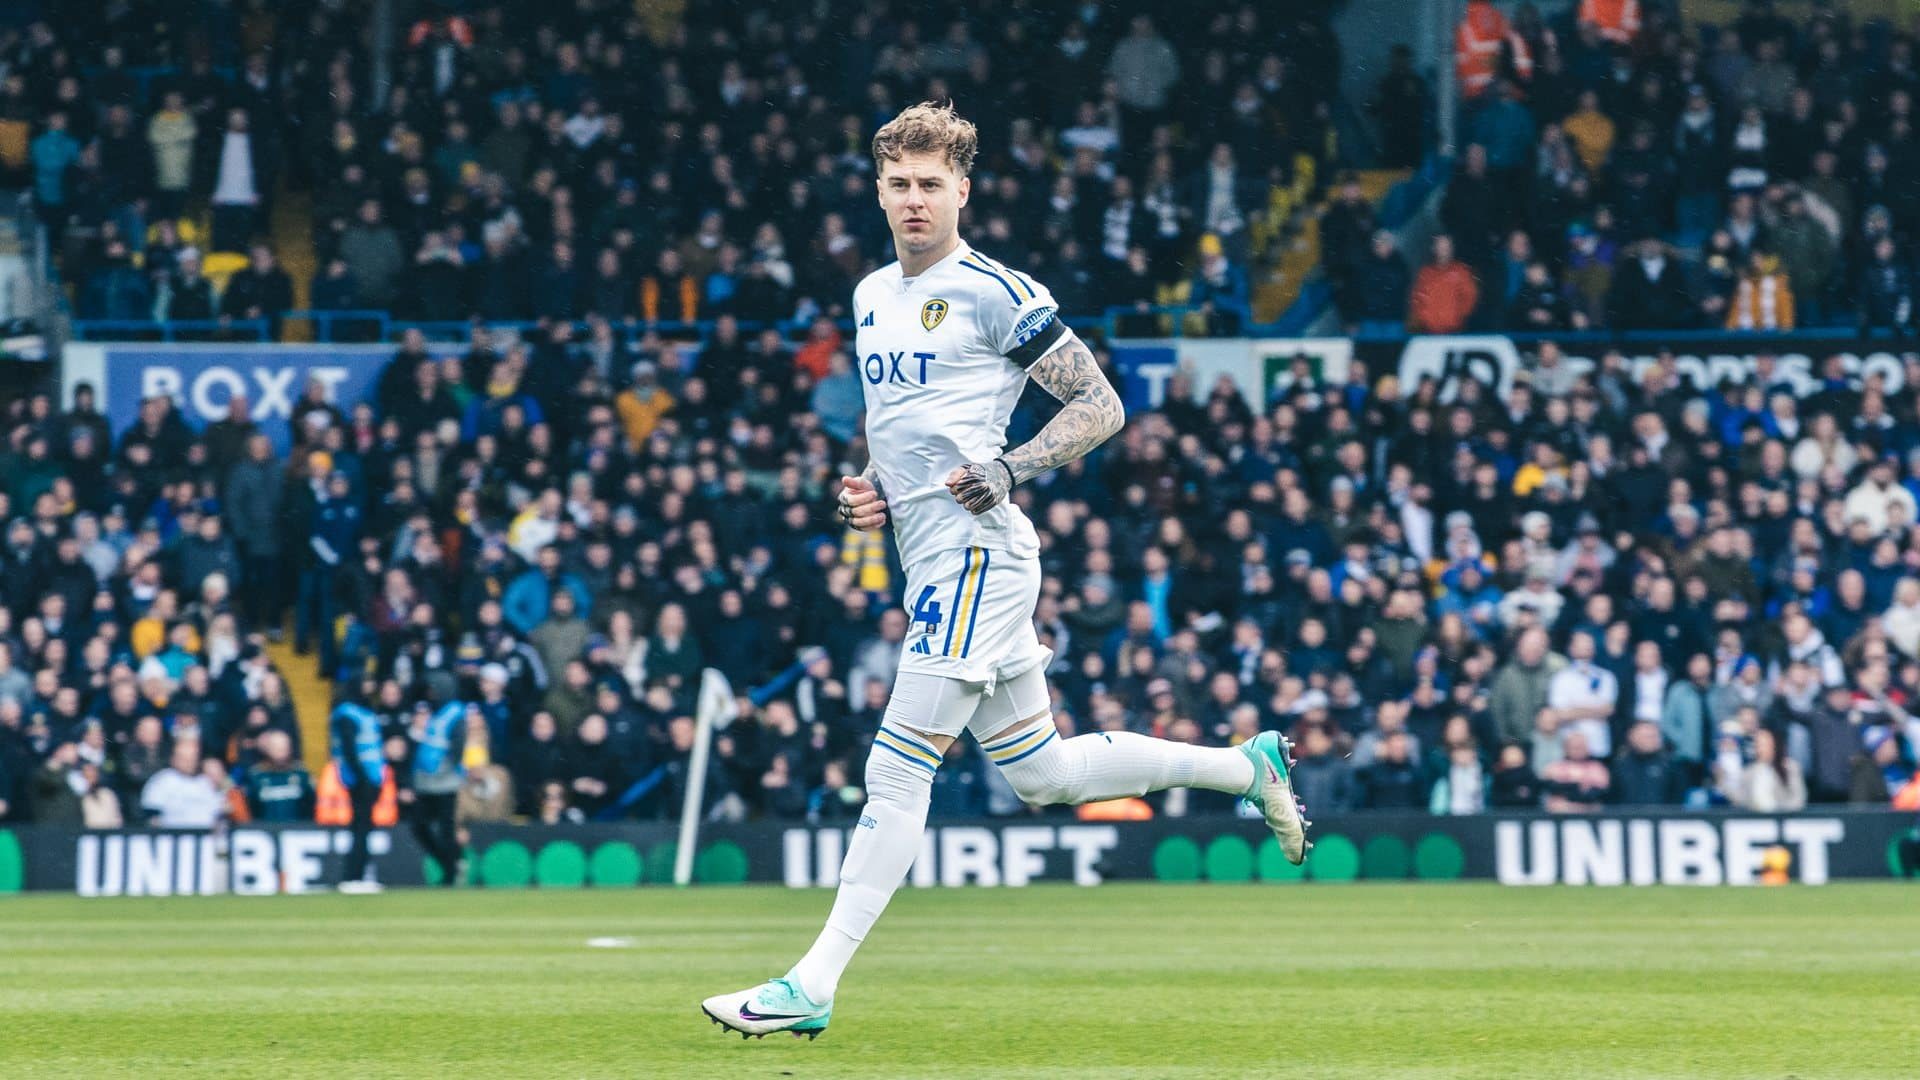 Joe Rodon striding across the pitch before the game with Preston